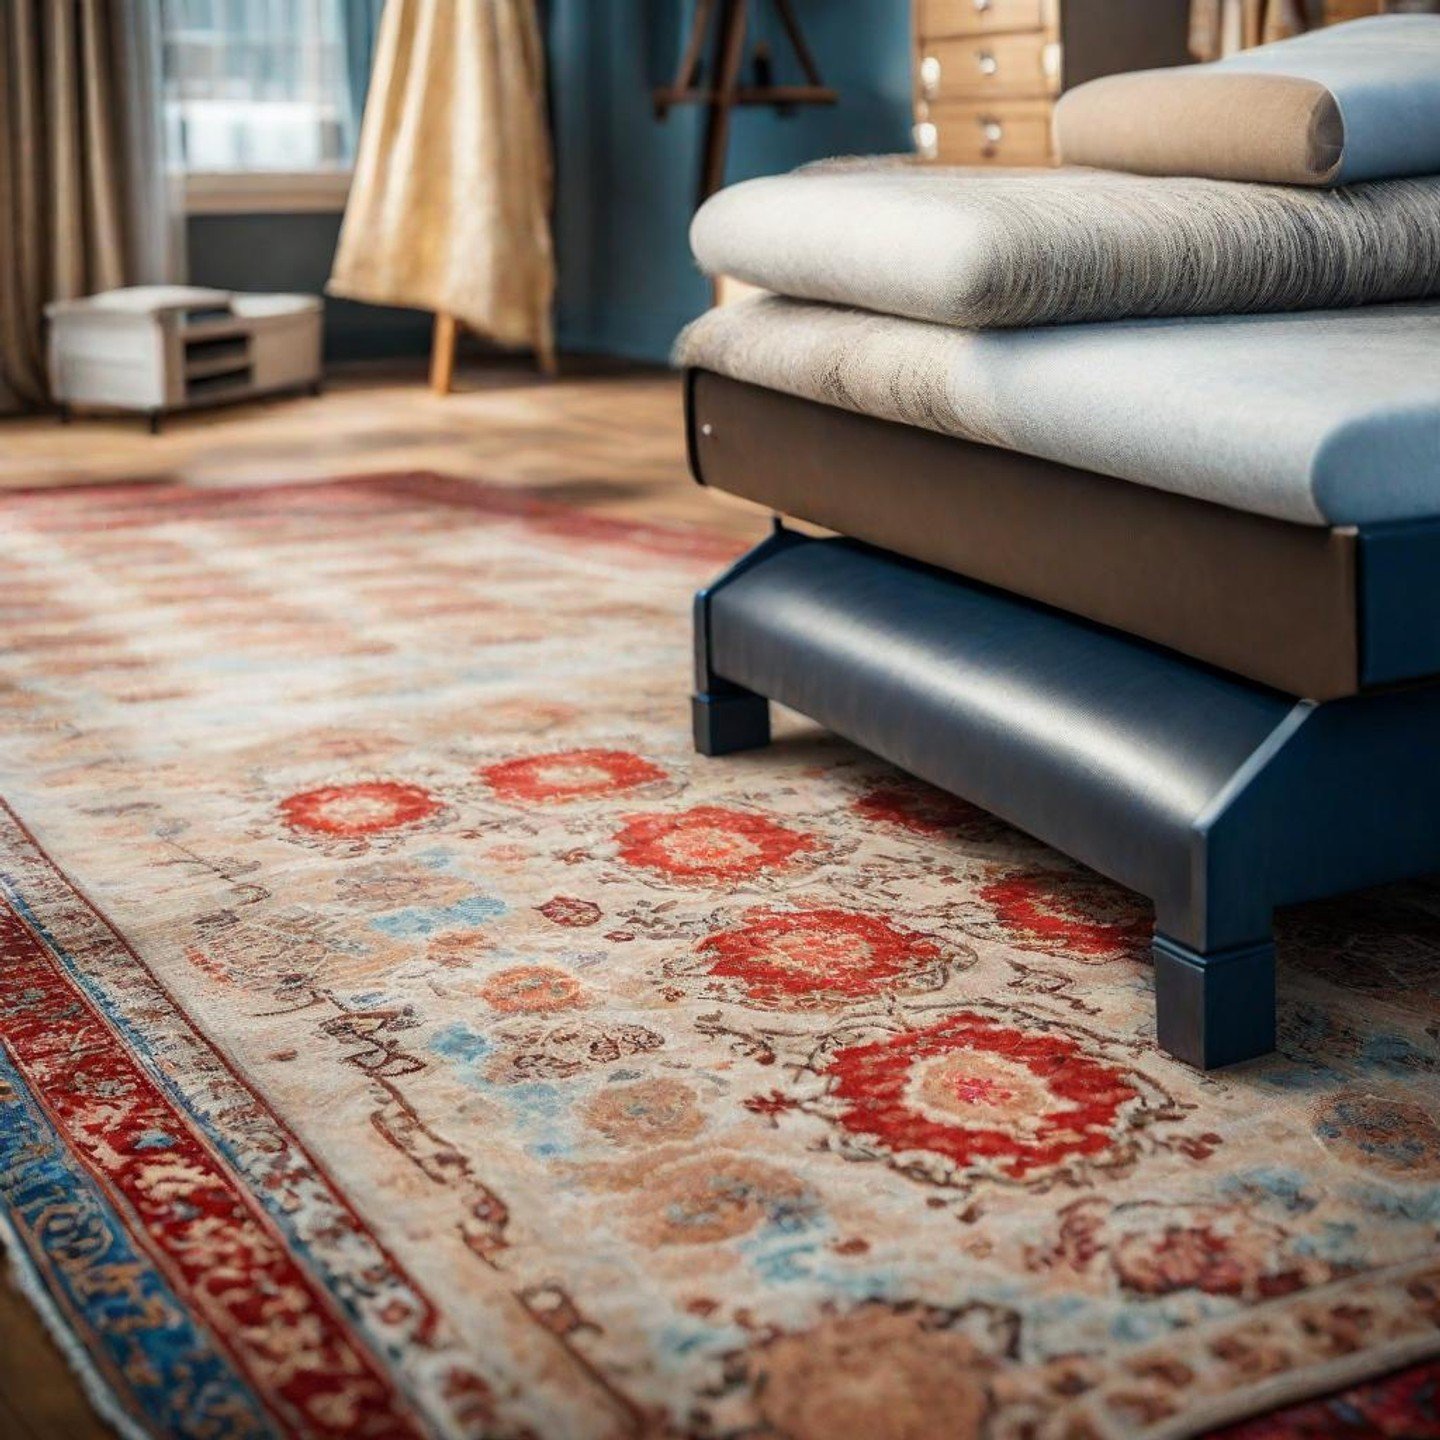 does dry cleaners clean rugs